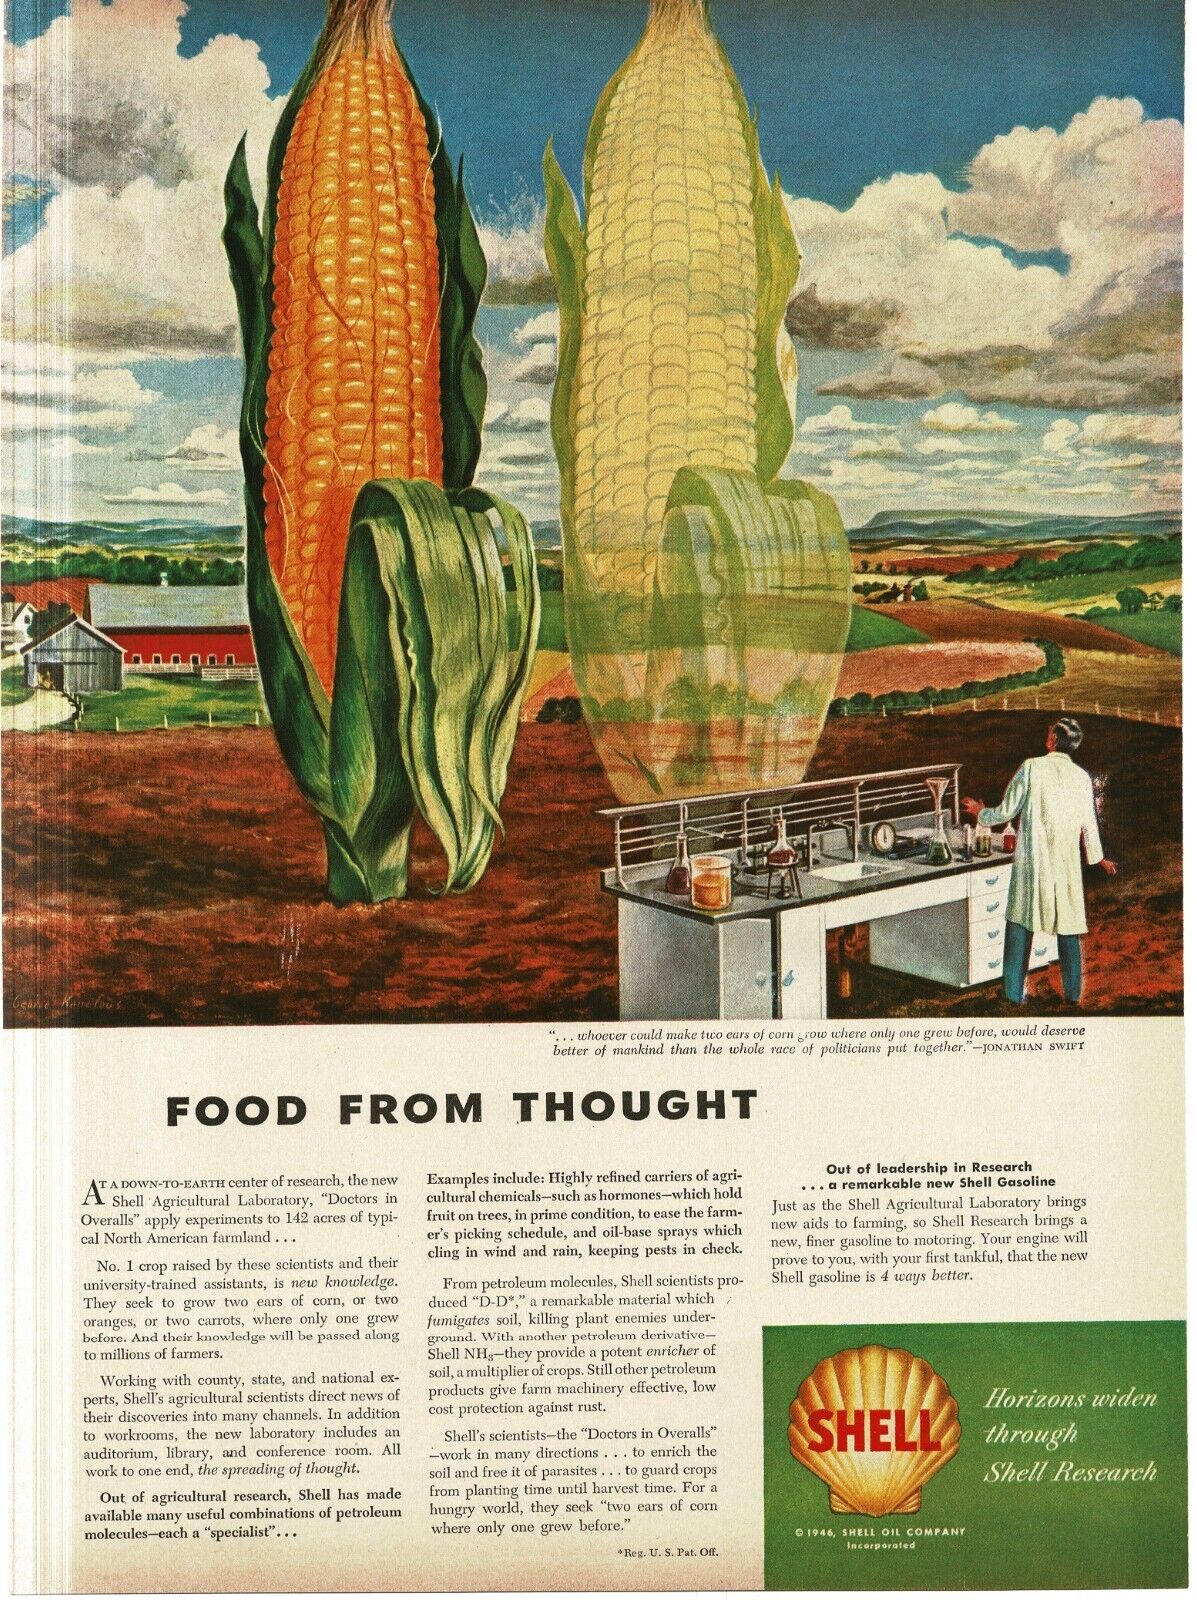 1946 Shell Oil Co. Research Agricultural Lab doubles corn production farm art Ad